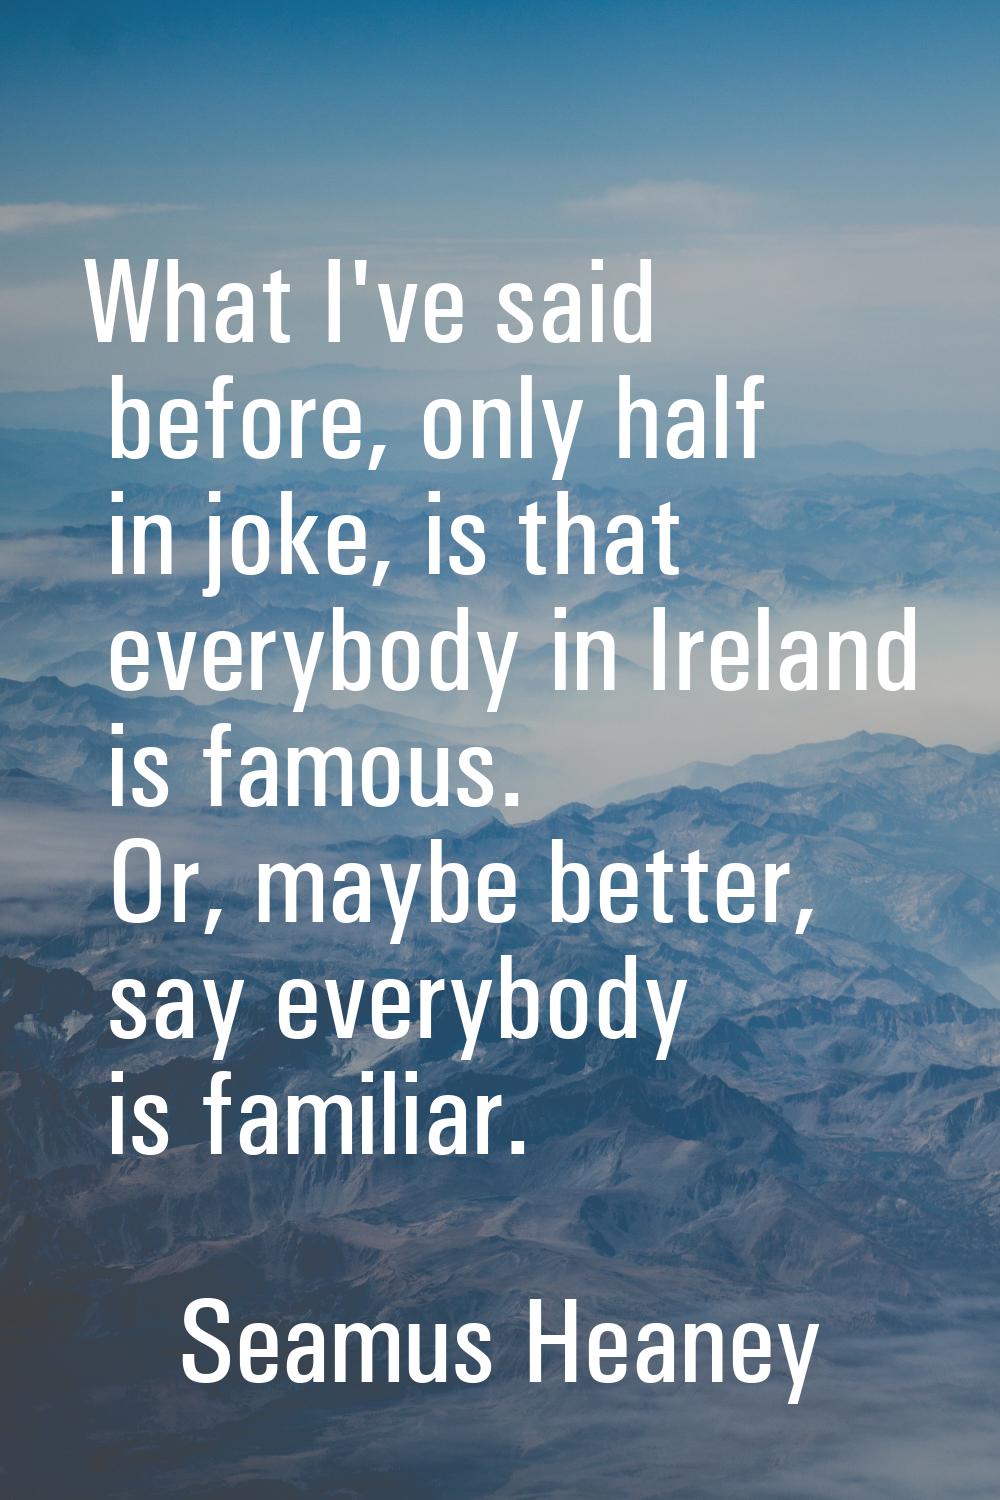 What I've said before, only half in joke, is that everybody in Ireland is famous. Or, maybe better,